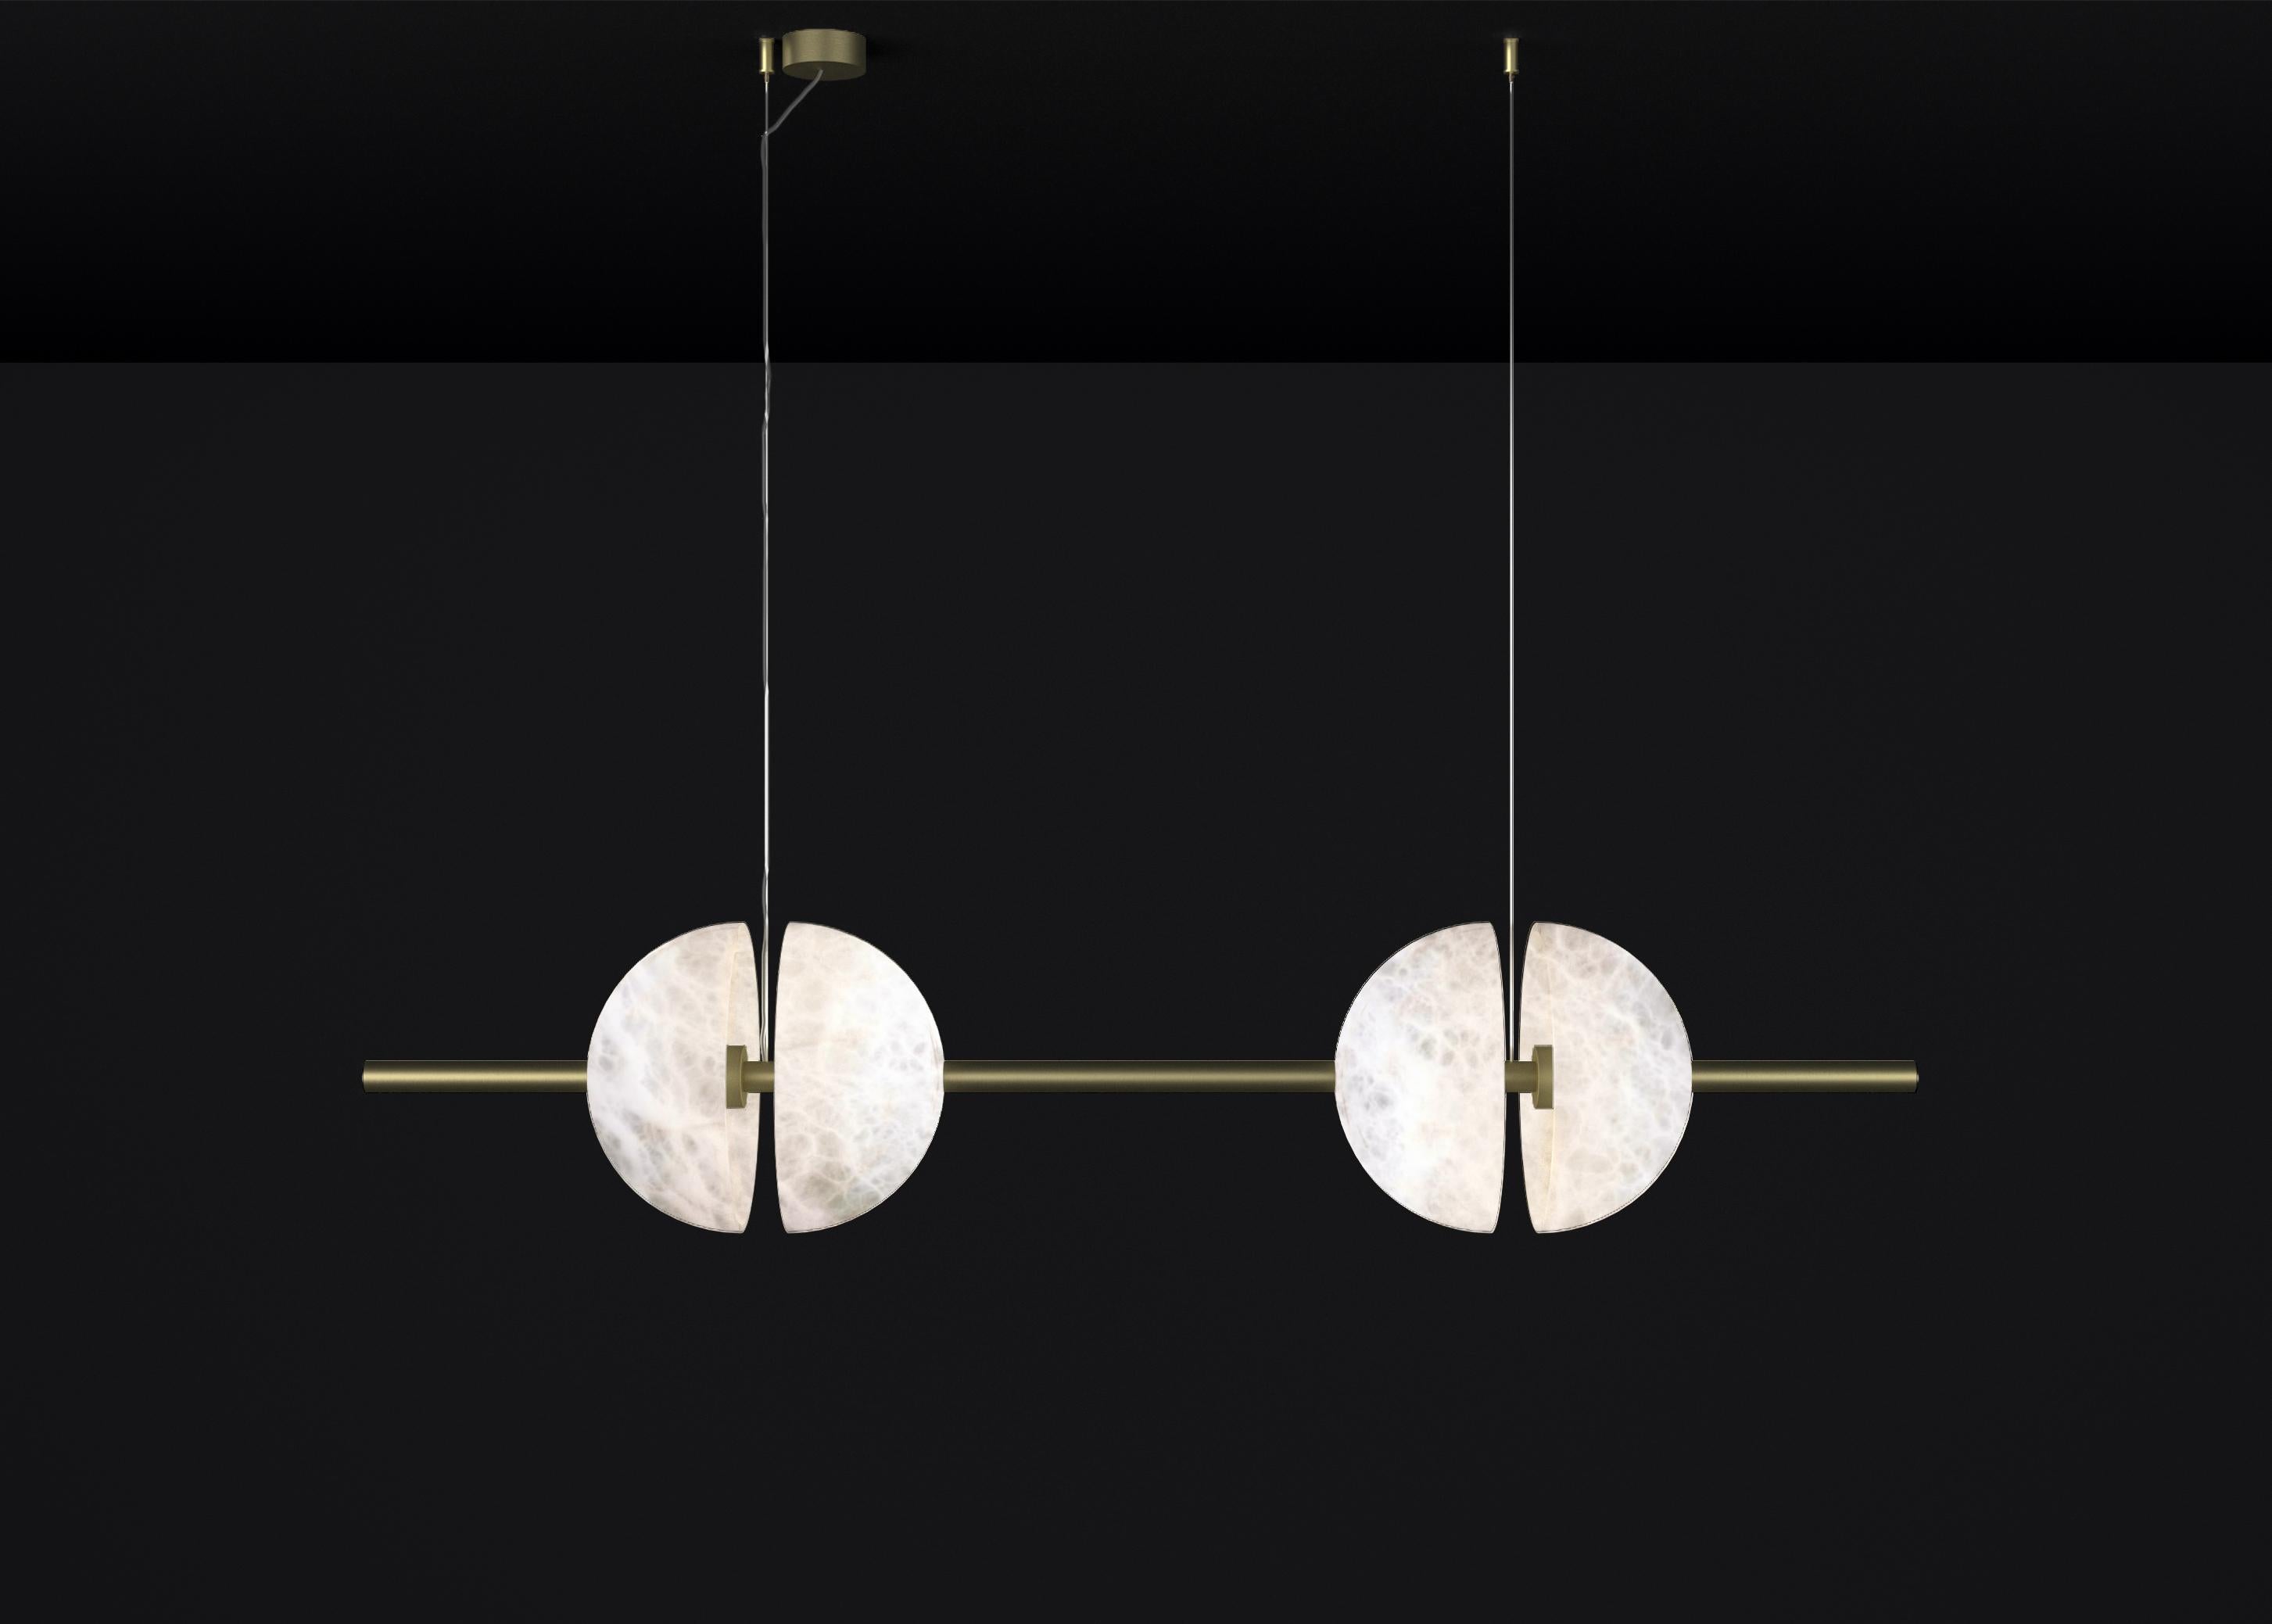 Ermes Brushed Brass And Alabaster Pendant Light 1 by Alabastro Italiano
Dimensions: D 30 x W 150 x H 300 cm.
Materials: White alabaster and brushed brass.

Available in different finishes: Shiny Silver, Bronze, Brushed Brass, Ruggine of Florence,